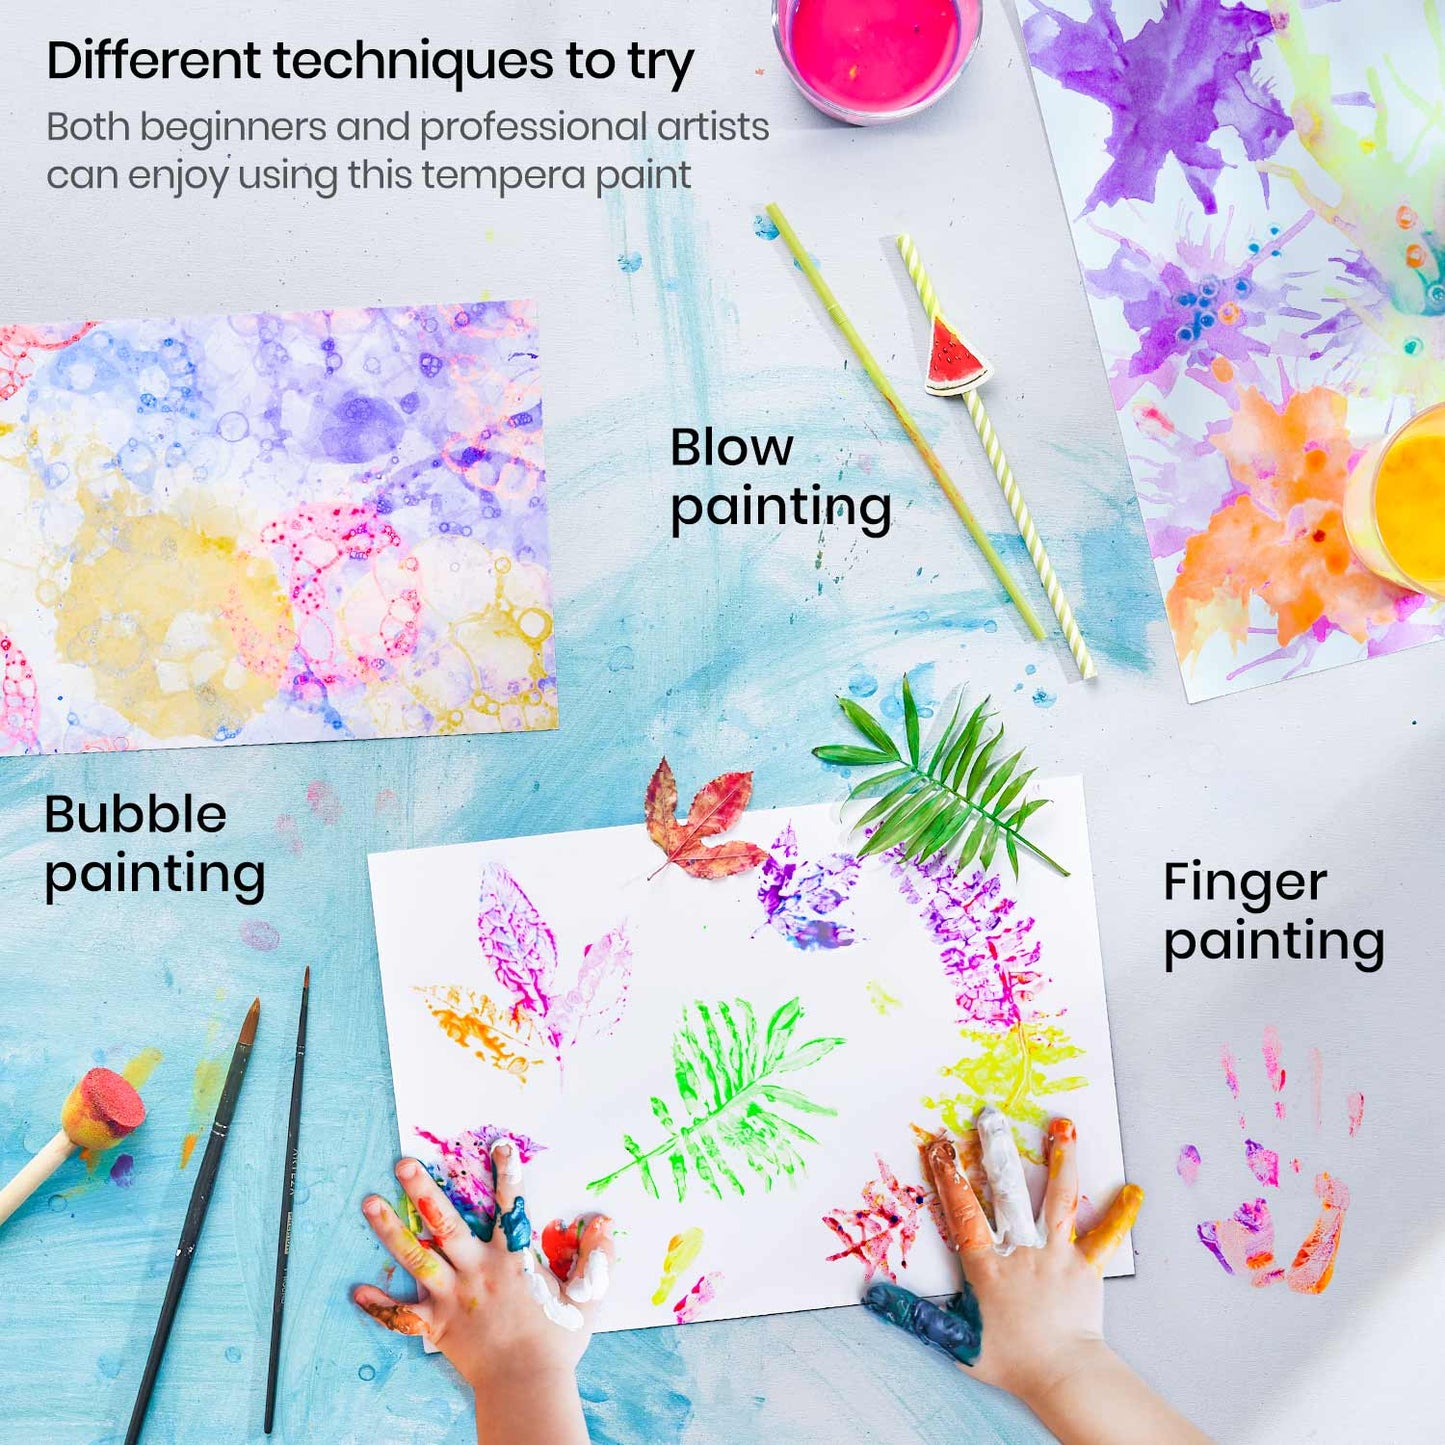 Tempera Paints for Kids – Painted Paper Art